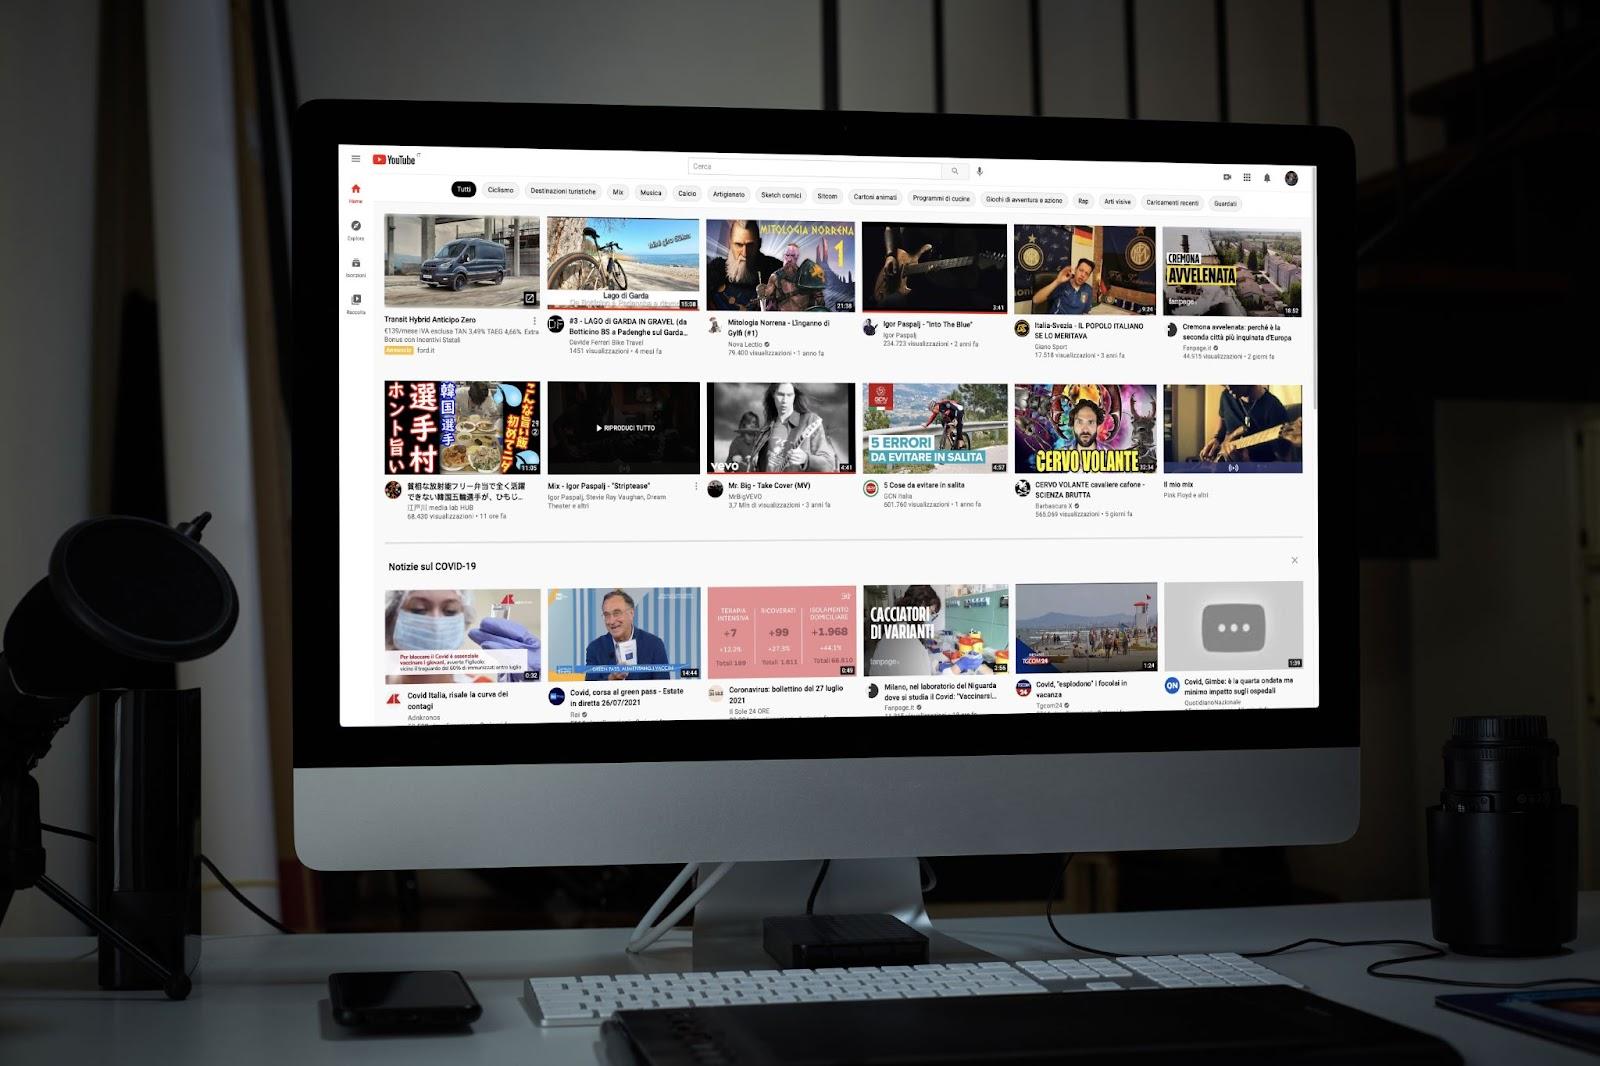 The YouTube homepage on a large iMac screen